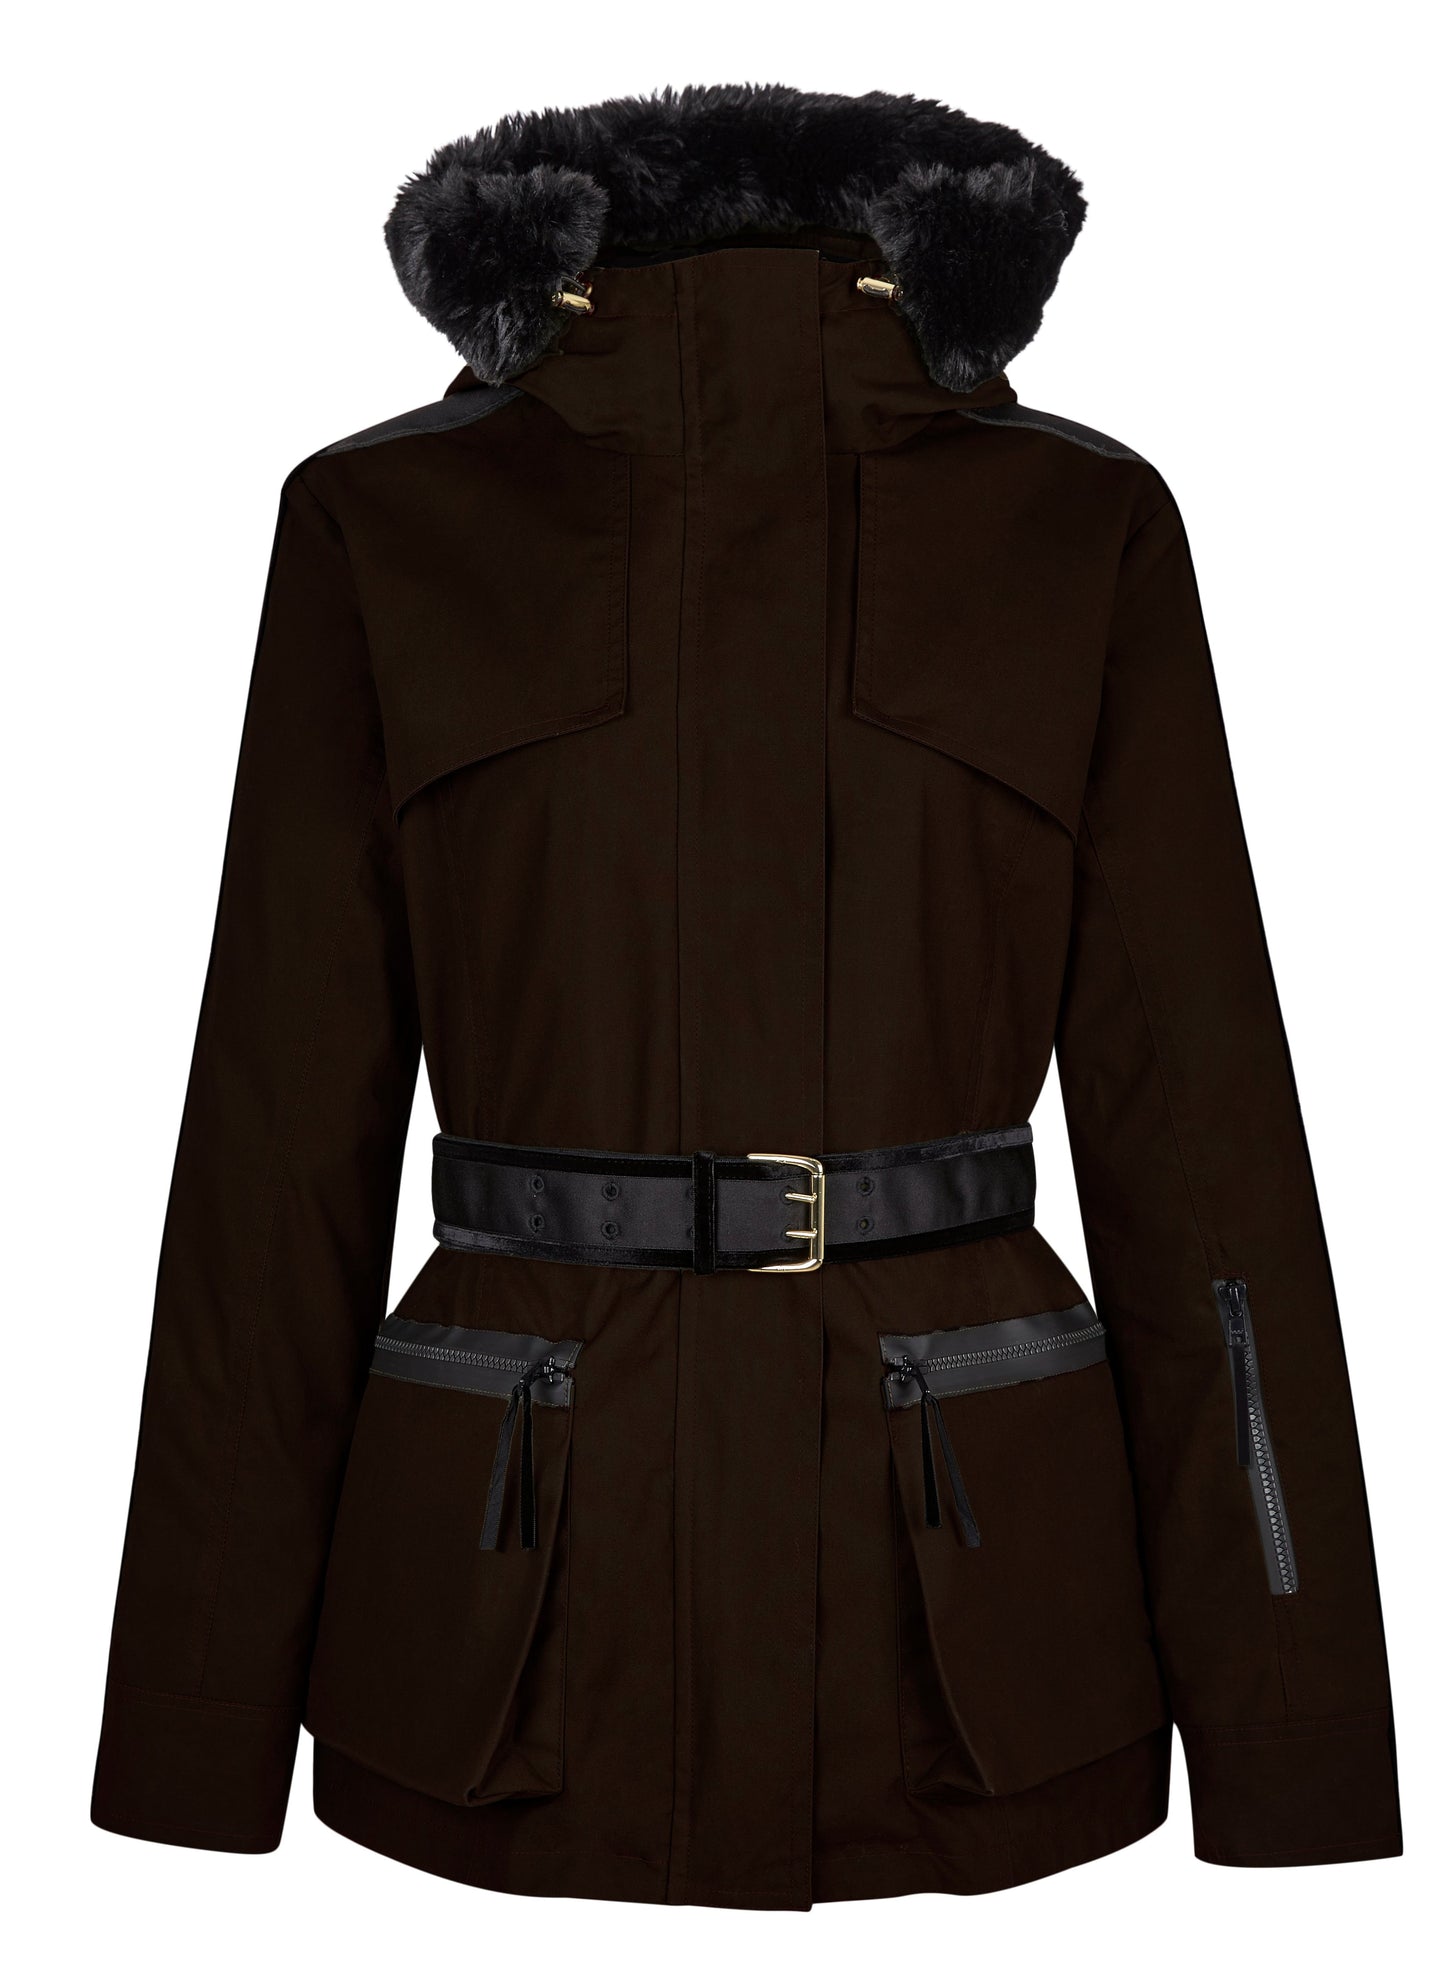 Elements Parka in Chocolate - Faux Fur